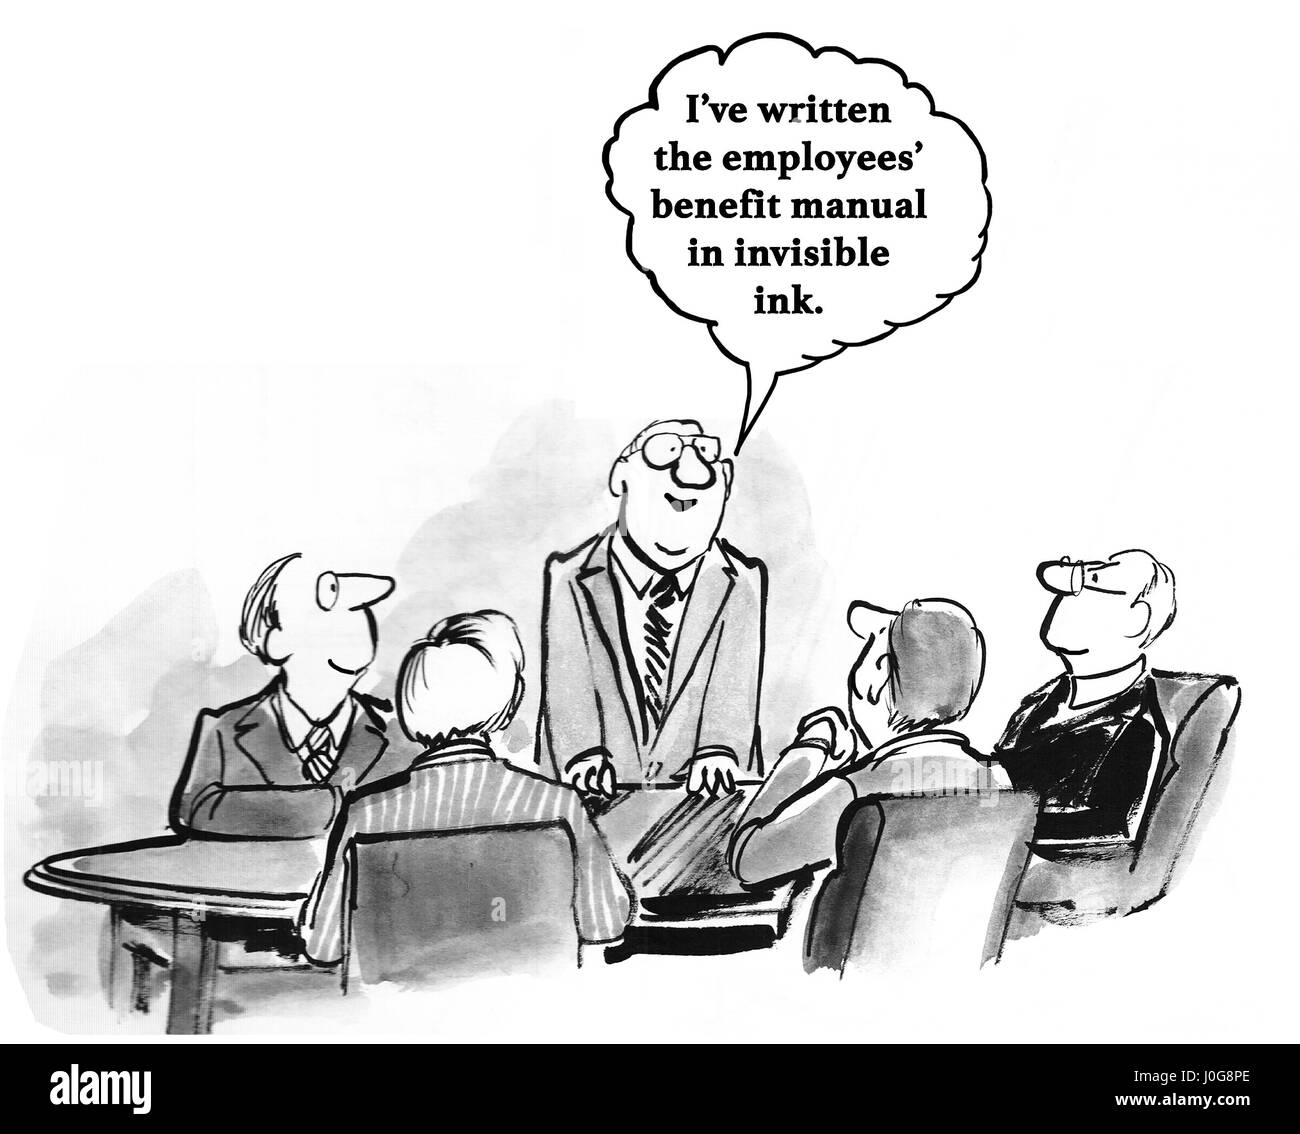 Business cartoon about writing the Employee Benefits Manual in invisible ink. Stock Photo